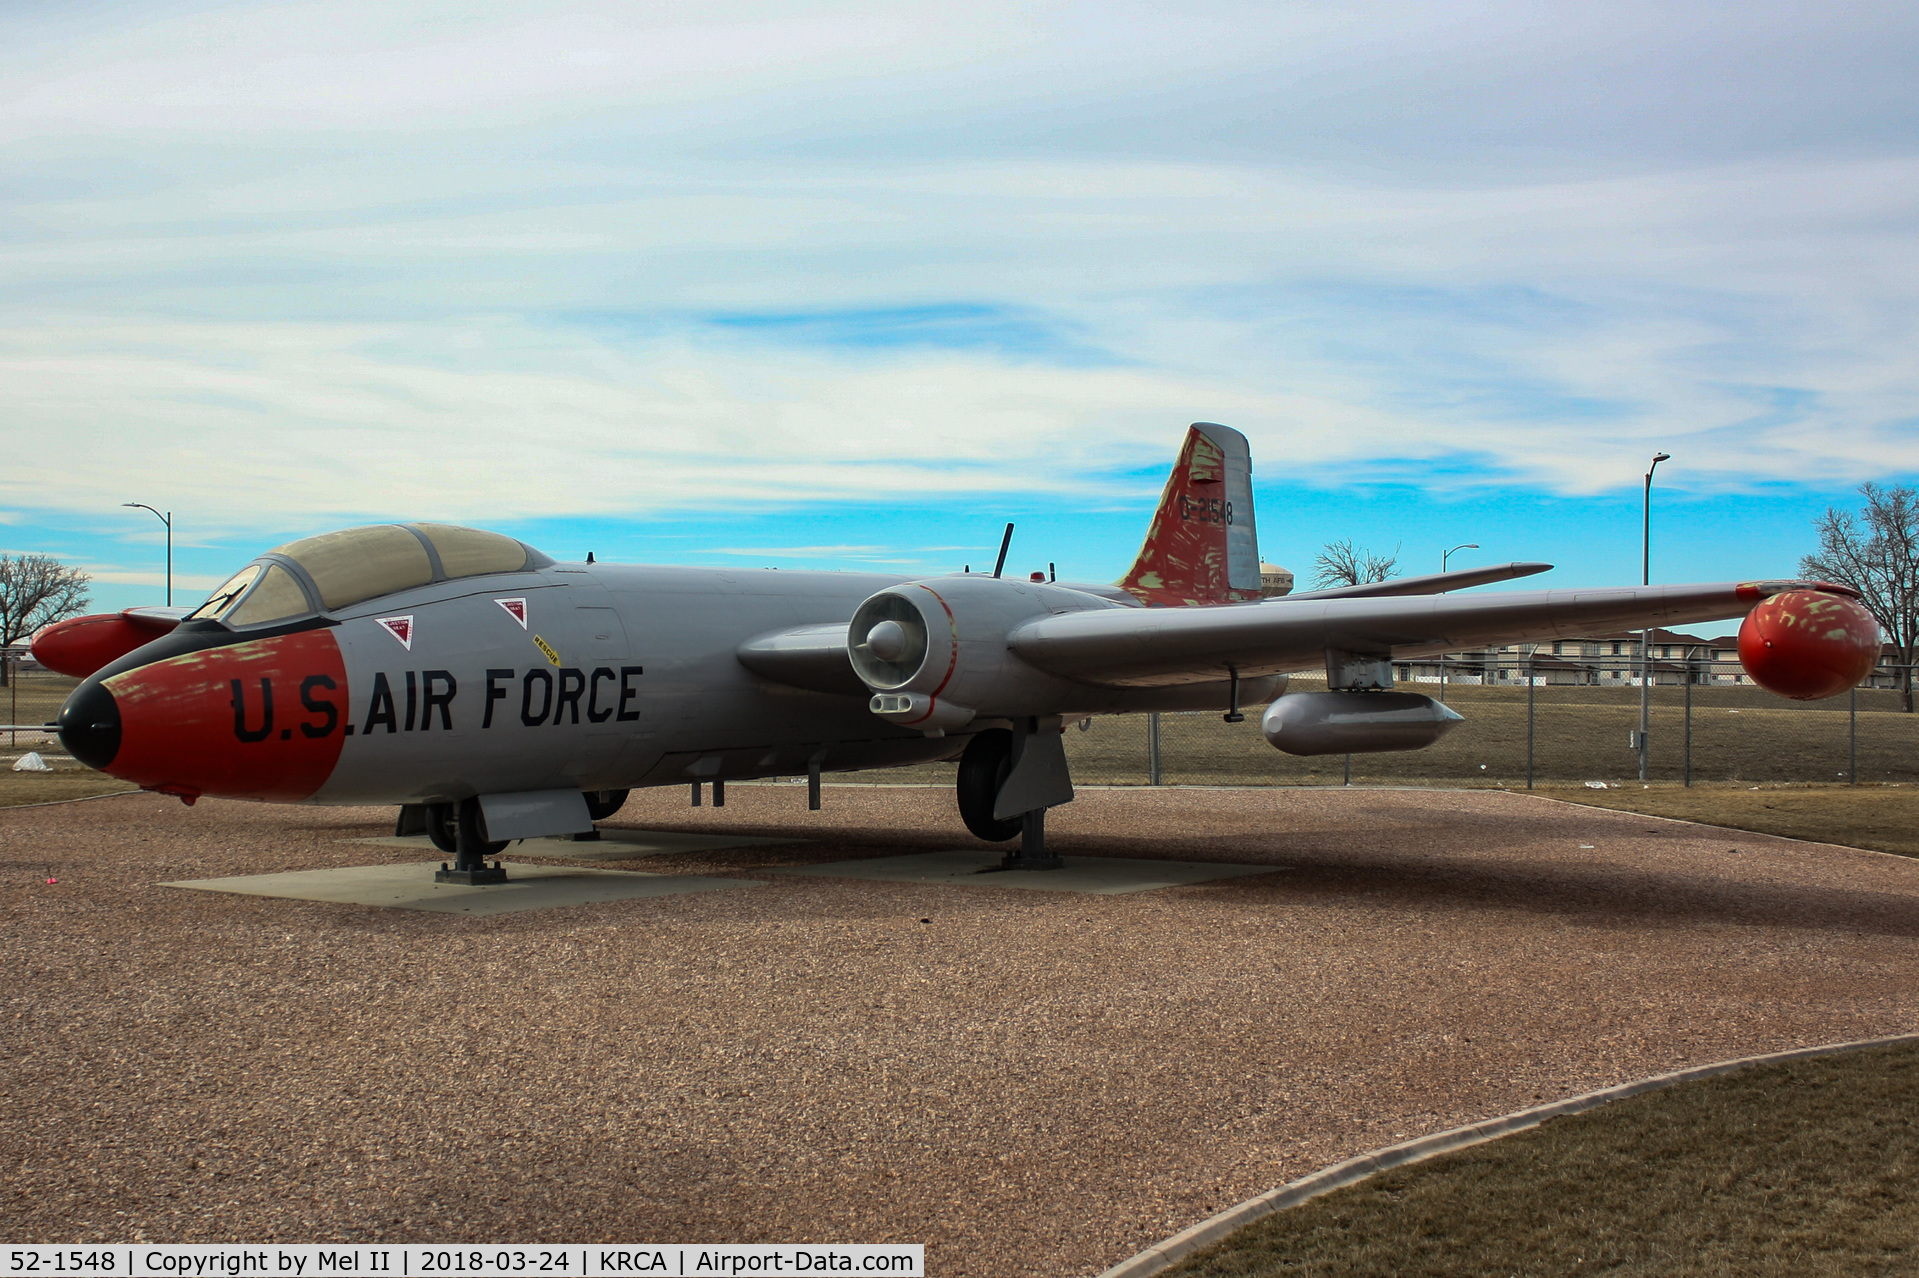 52-1548, 1952 Martin EB-57B Canberra C/N 131, On display at the South Dakota Air and Space Museum at Ellsworth Air Force Base.